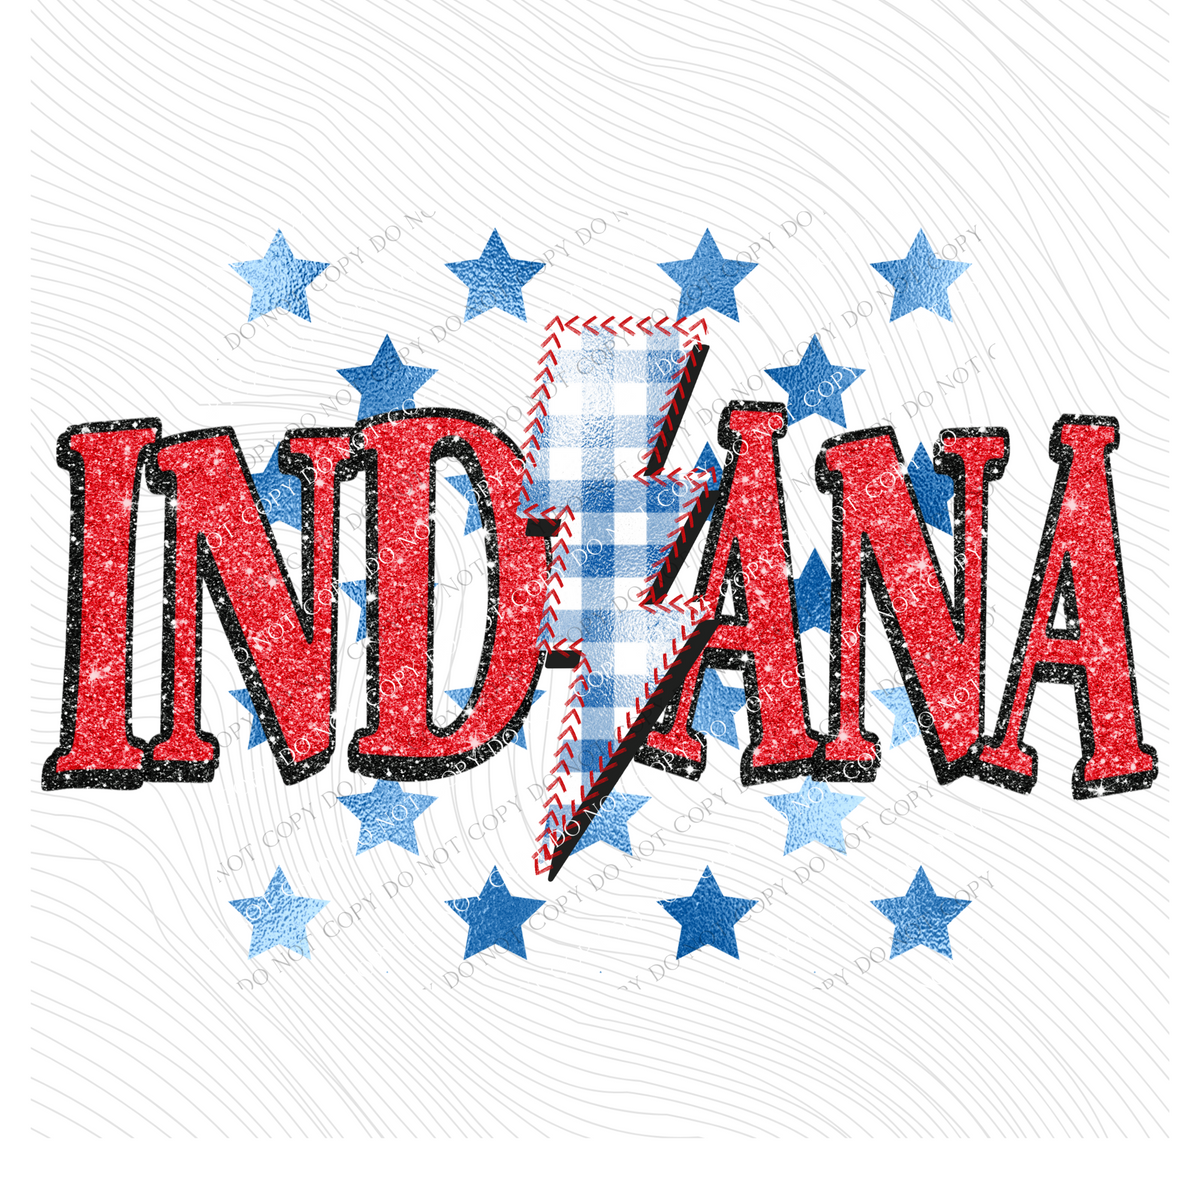 Indiana Glitter with Foil Stars & Gingham Stitched Bolt in Red, White & Blue Patriotic Digital Design, PNG